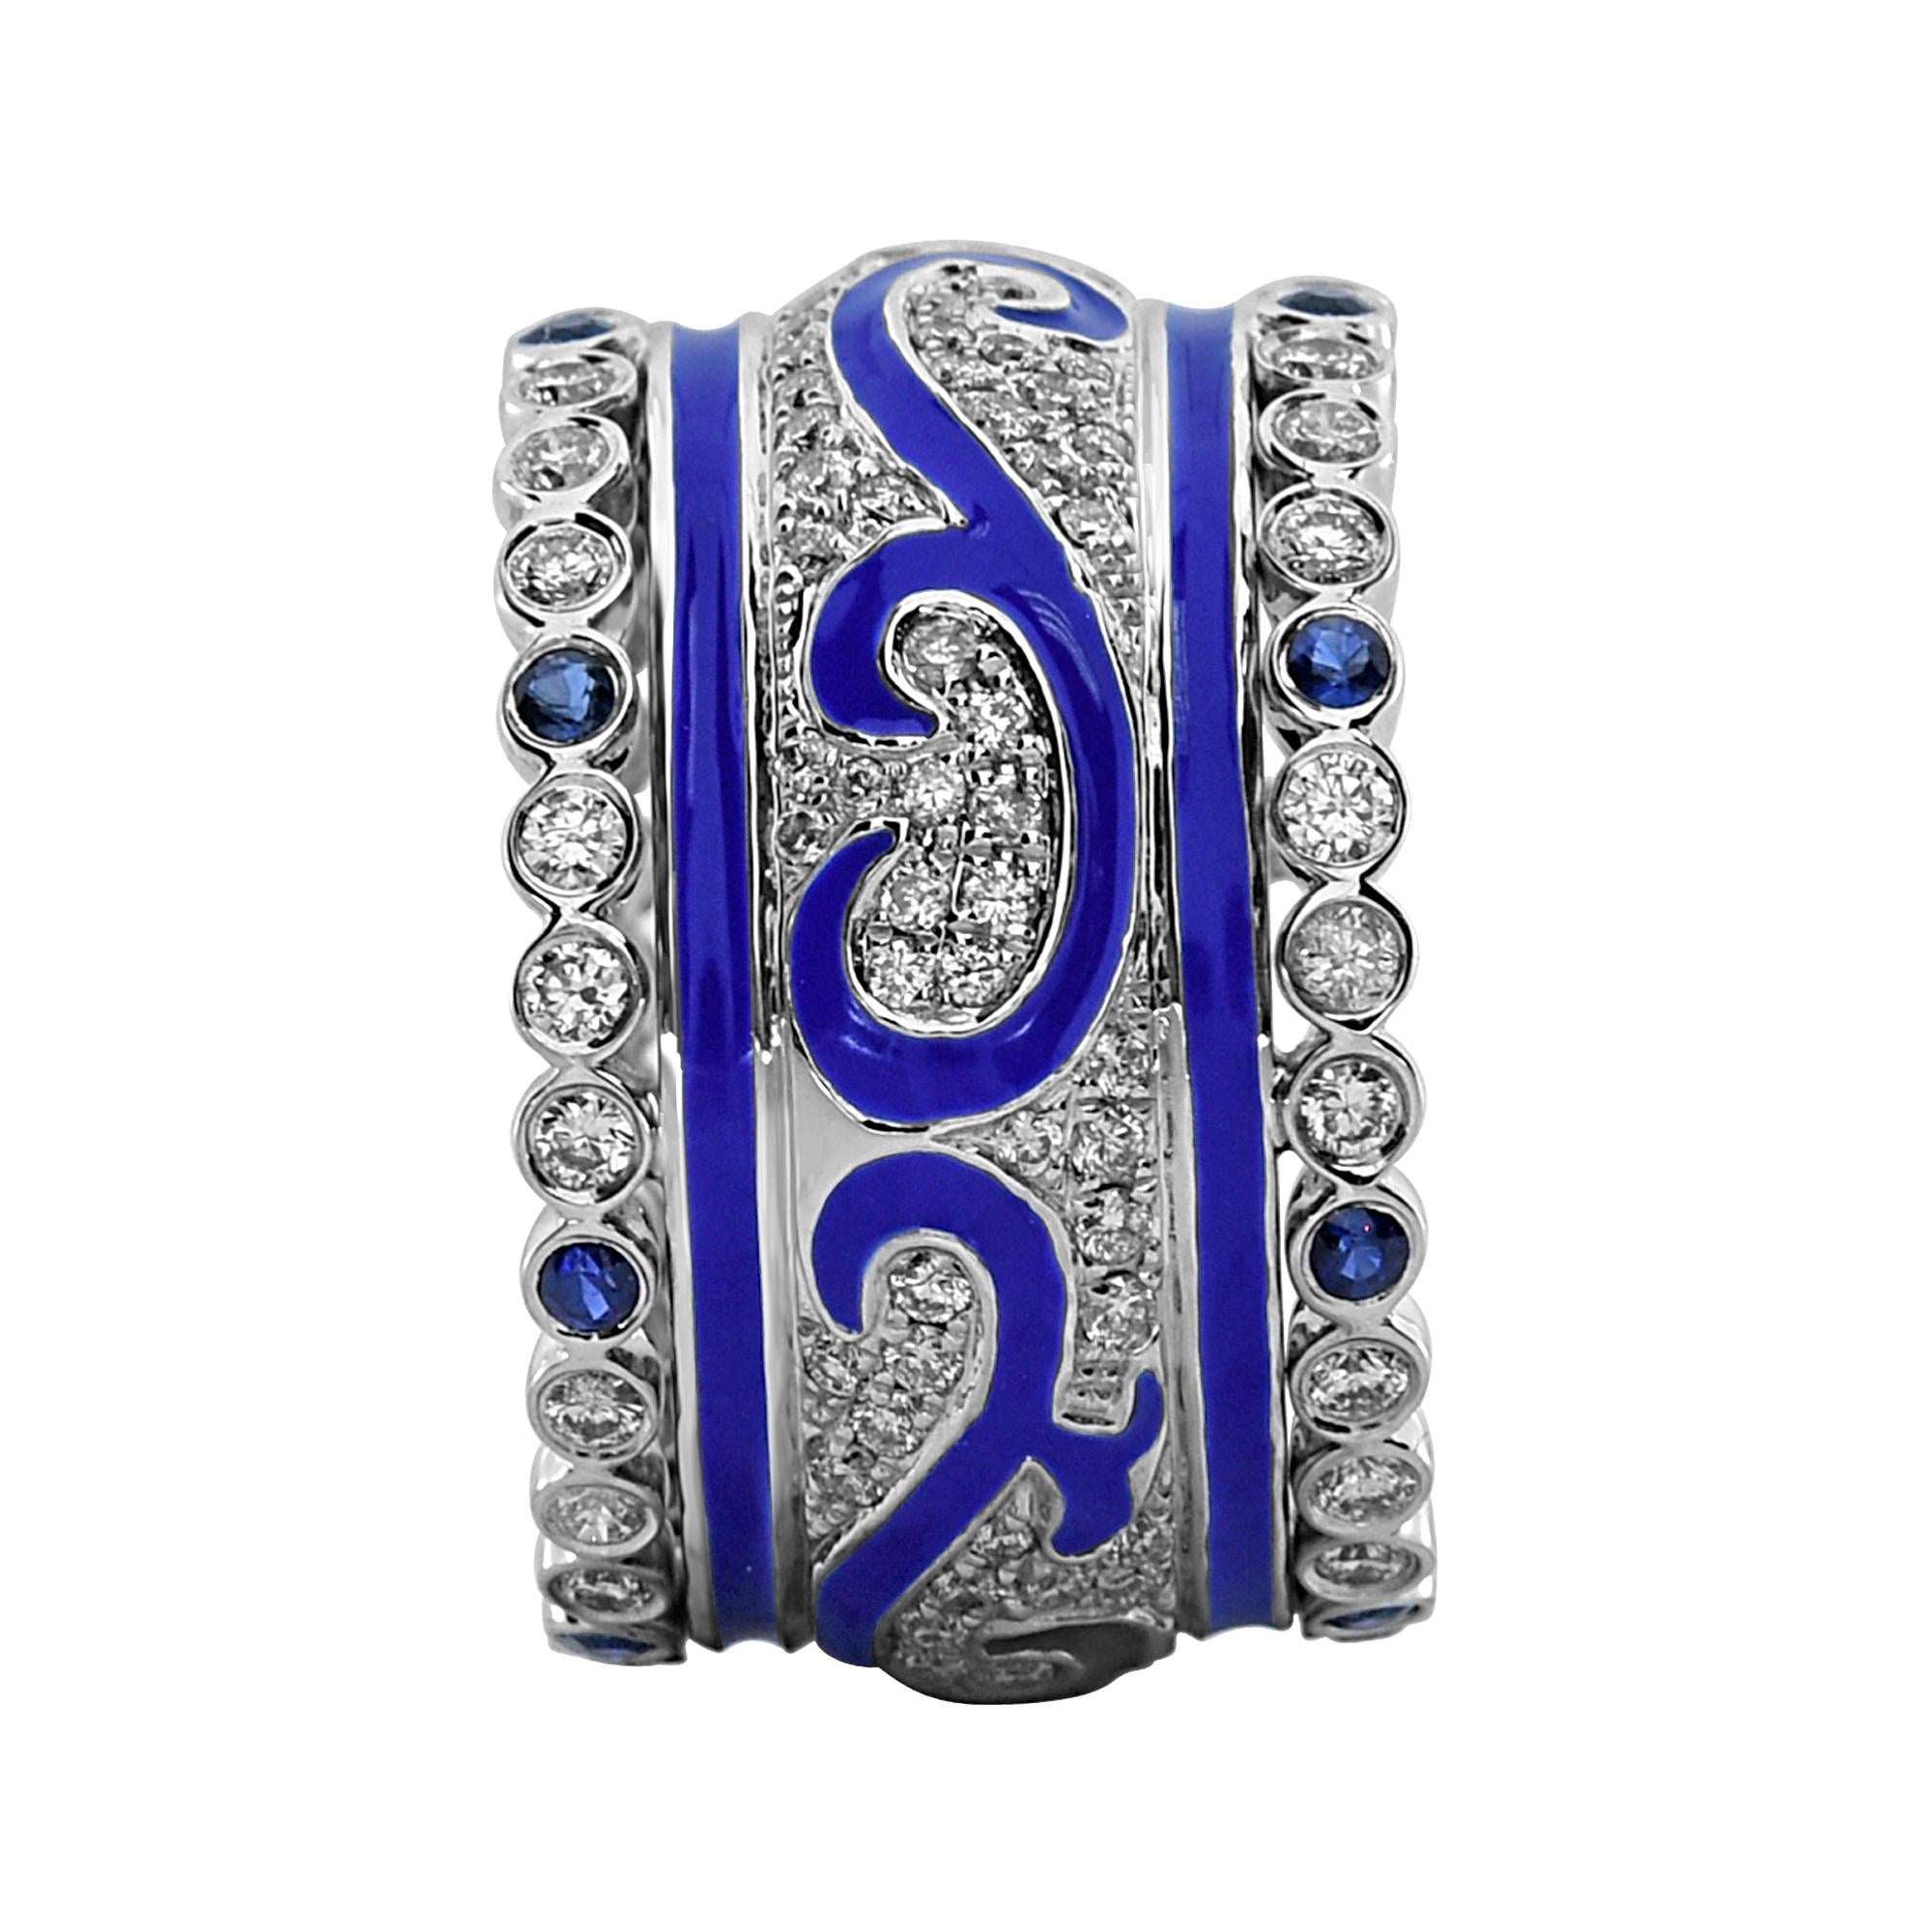 1.62 Carat White Diamond And Sapphire Enamel 18K White Gold Ring will make you have a new fun look to add to your jewelry collection.
This stunning ring made by Shimon's Creations enhanced with 0.30 carats of blue sapphires, totaling 14 round cut